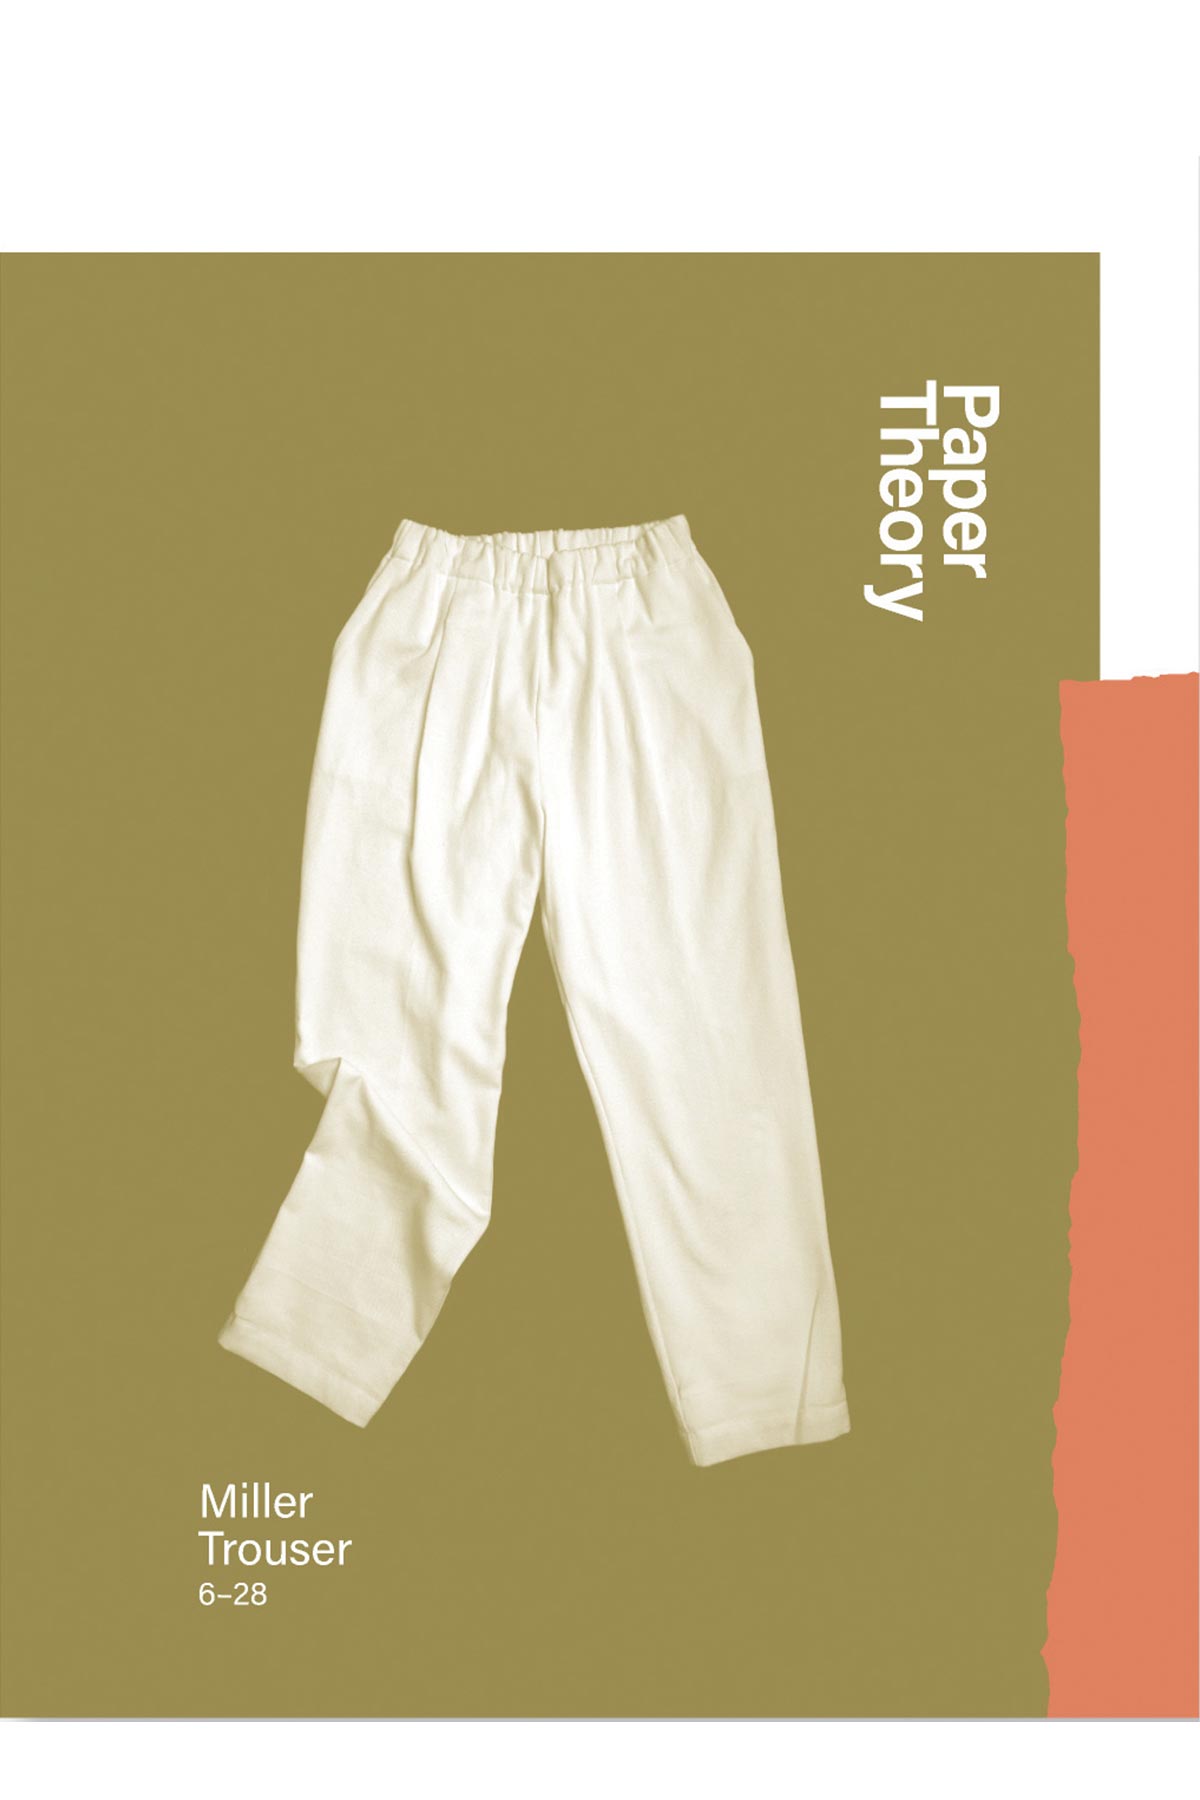 Paper Theory Miller Trousers Sewing Pattern 6-28